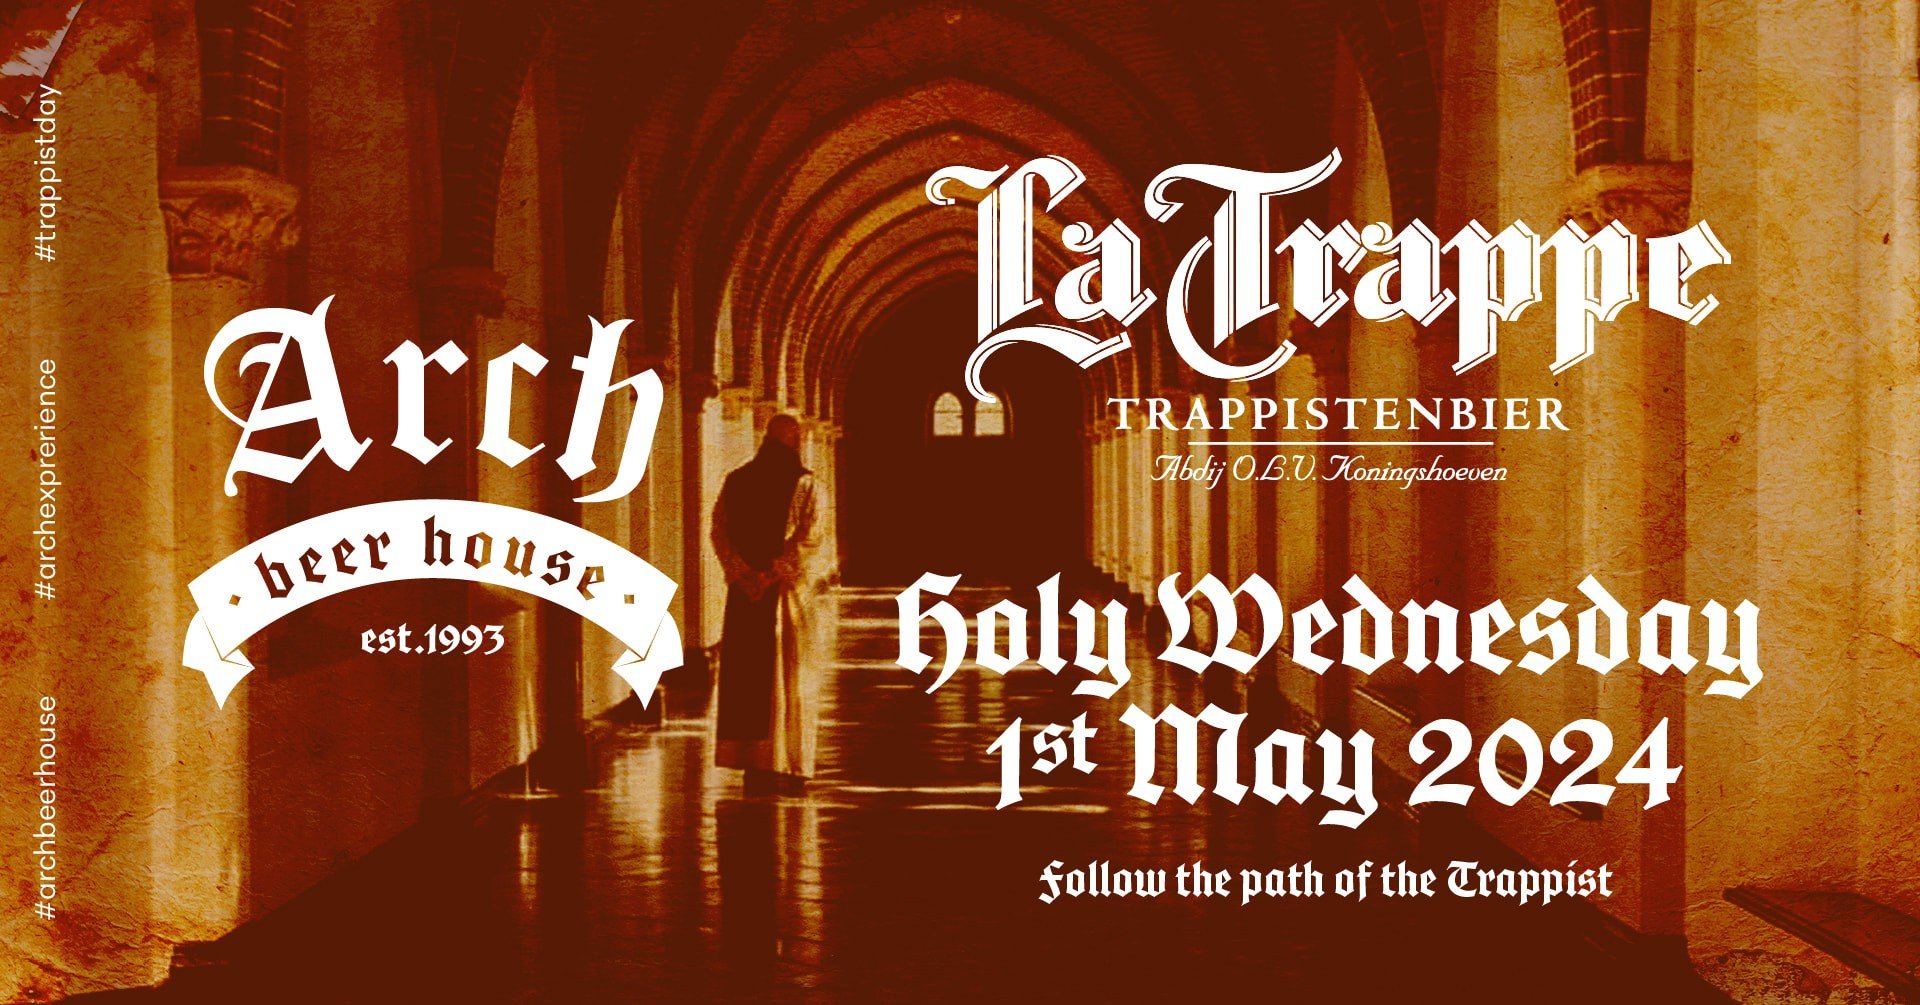 Holy Wednesday with La Trappe Trappist 2024 - Arch Beer House - 01/05/2024